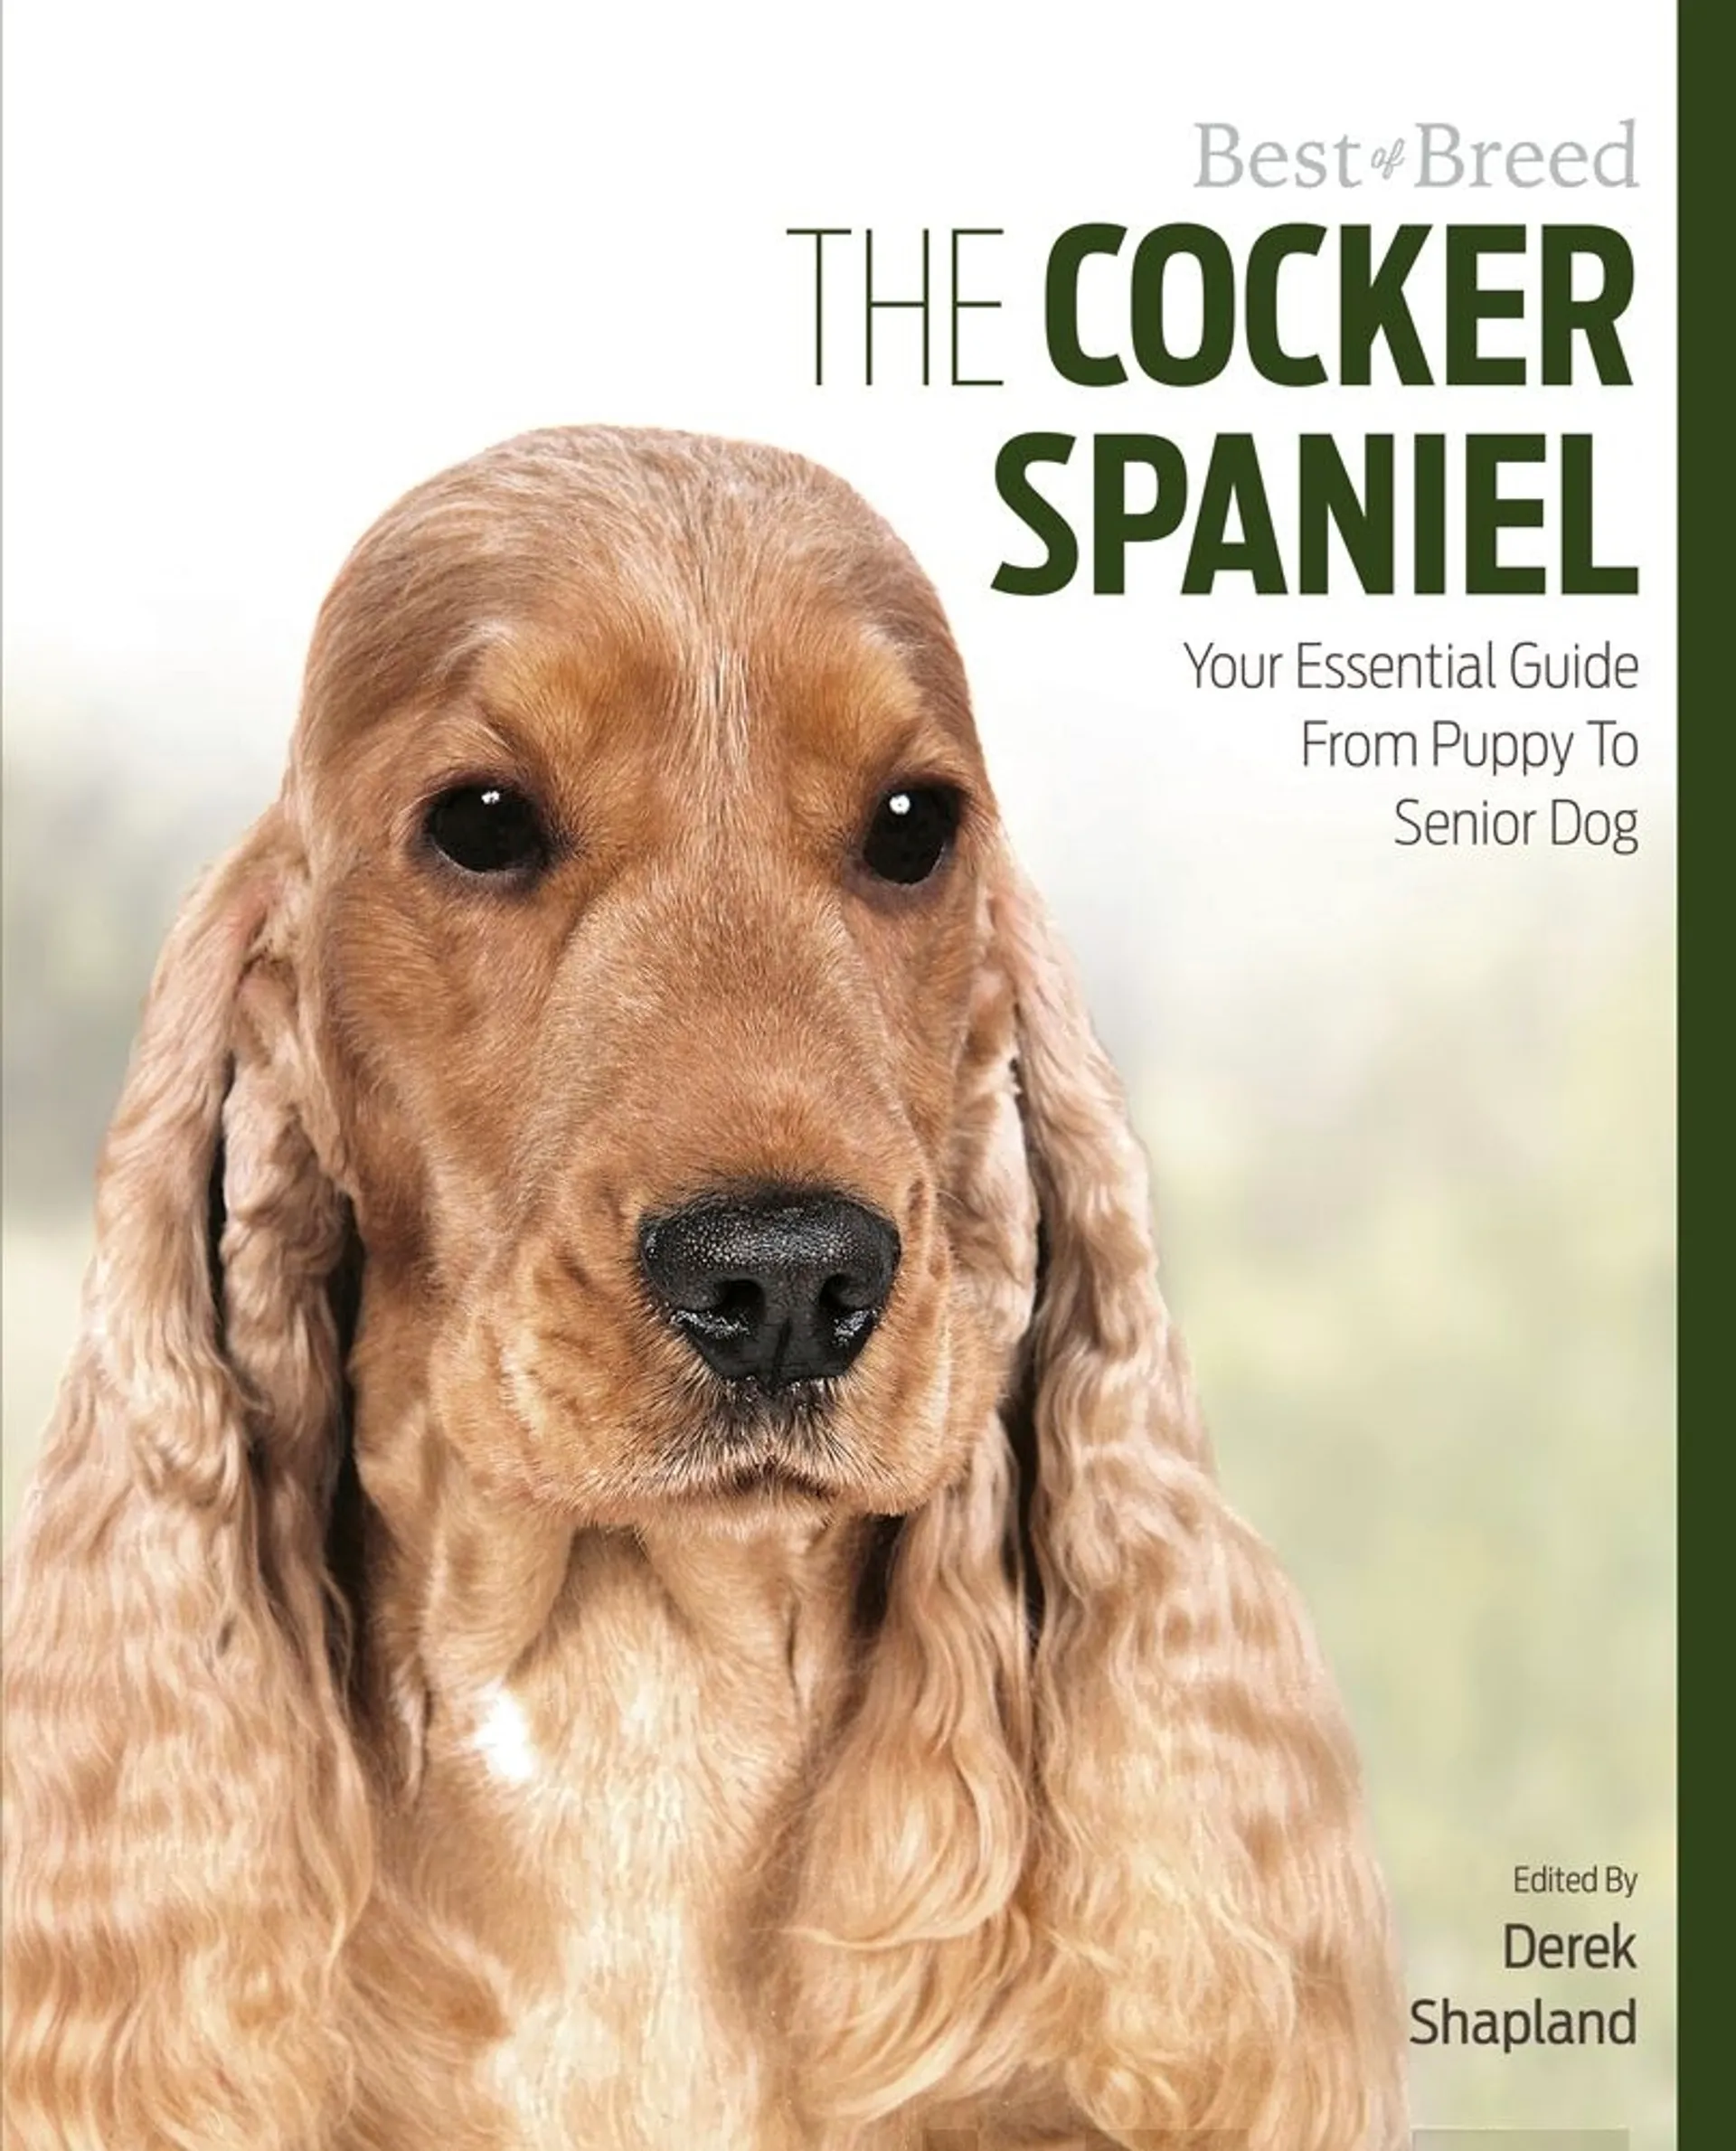 Shapland, The Cocker Spaniel - Your Essential Guide From Puppy to Senior Dog